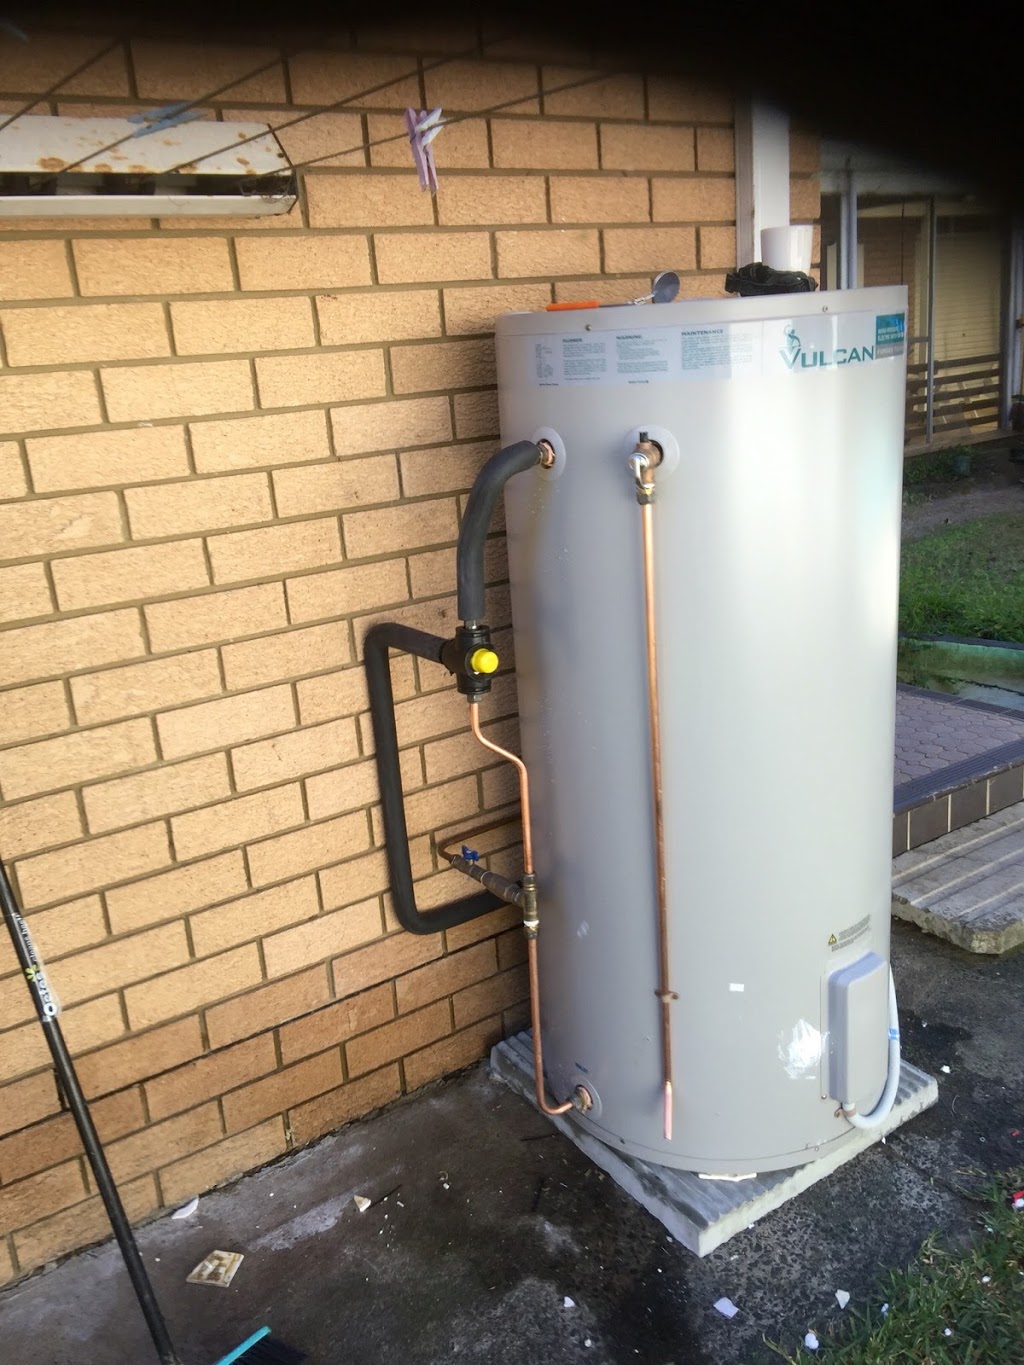 Central Coast Budget Hot Water | plumber | 77 McDonagh Rd, Wyong NSW 2259, Australia | 0412074032 OR +61 412 074 032